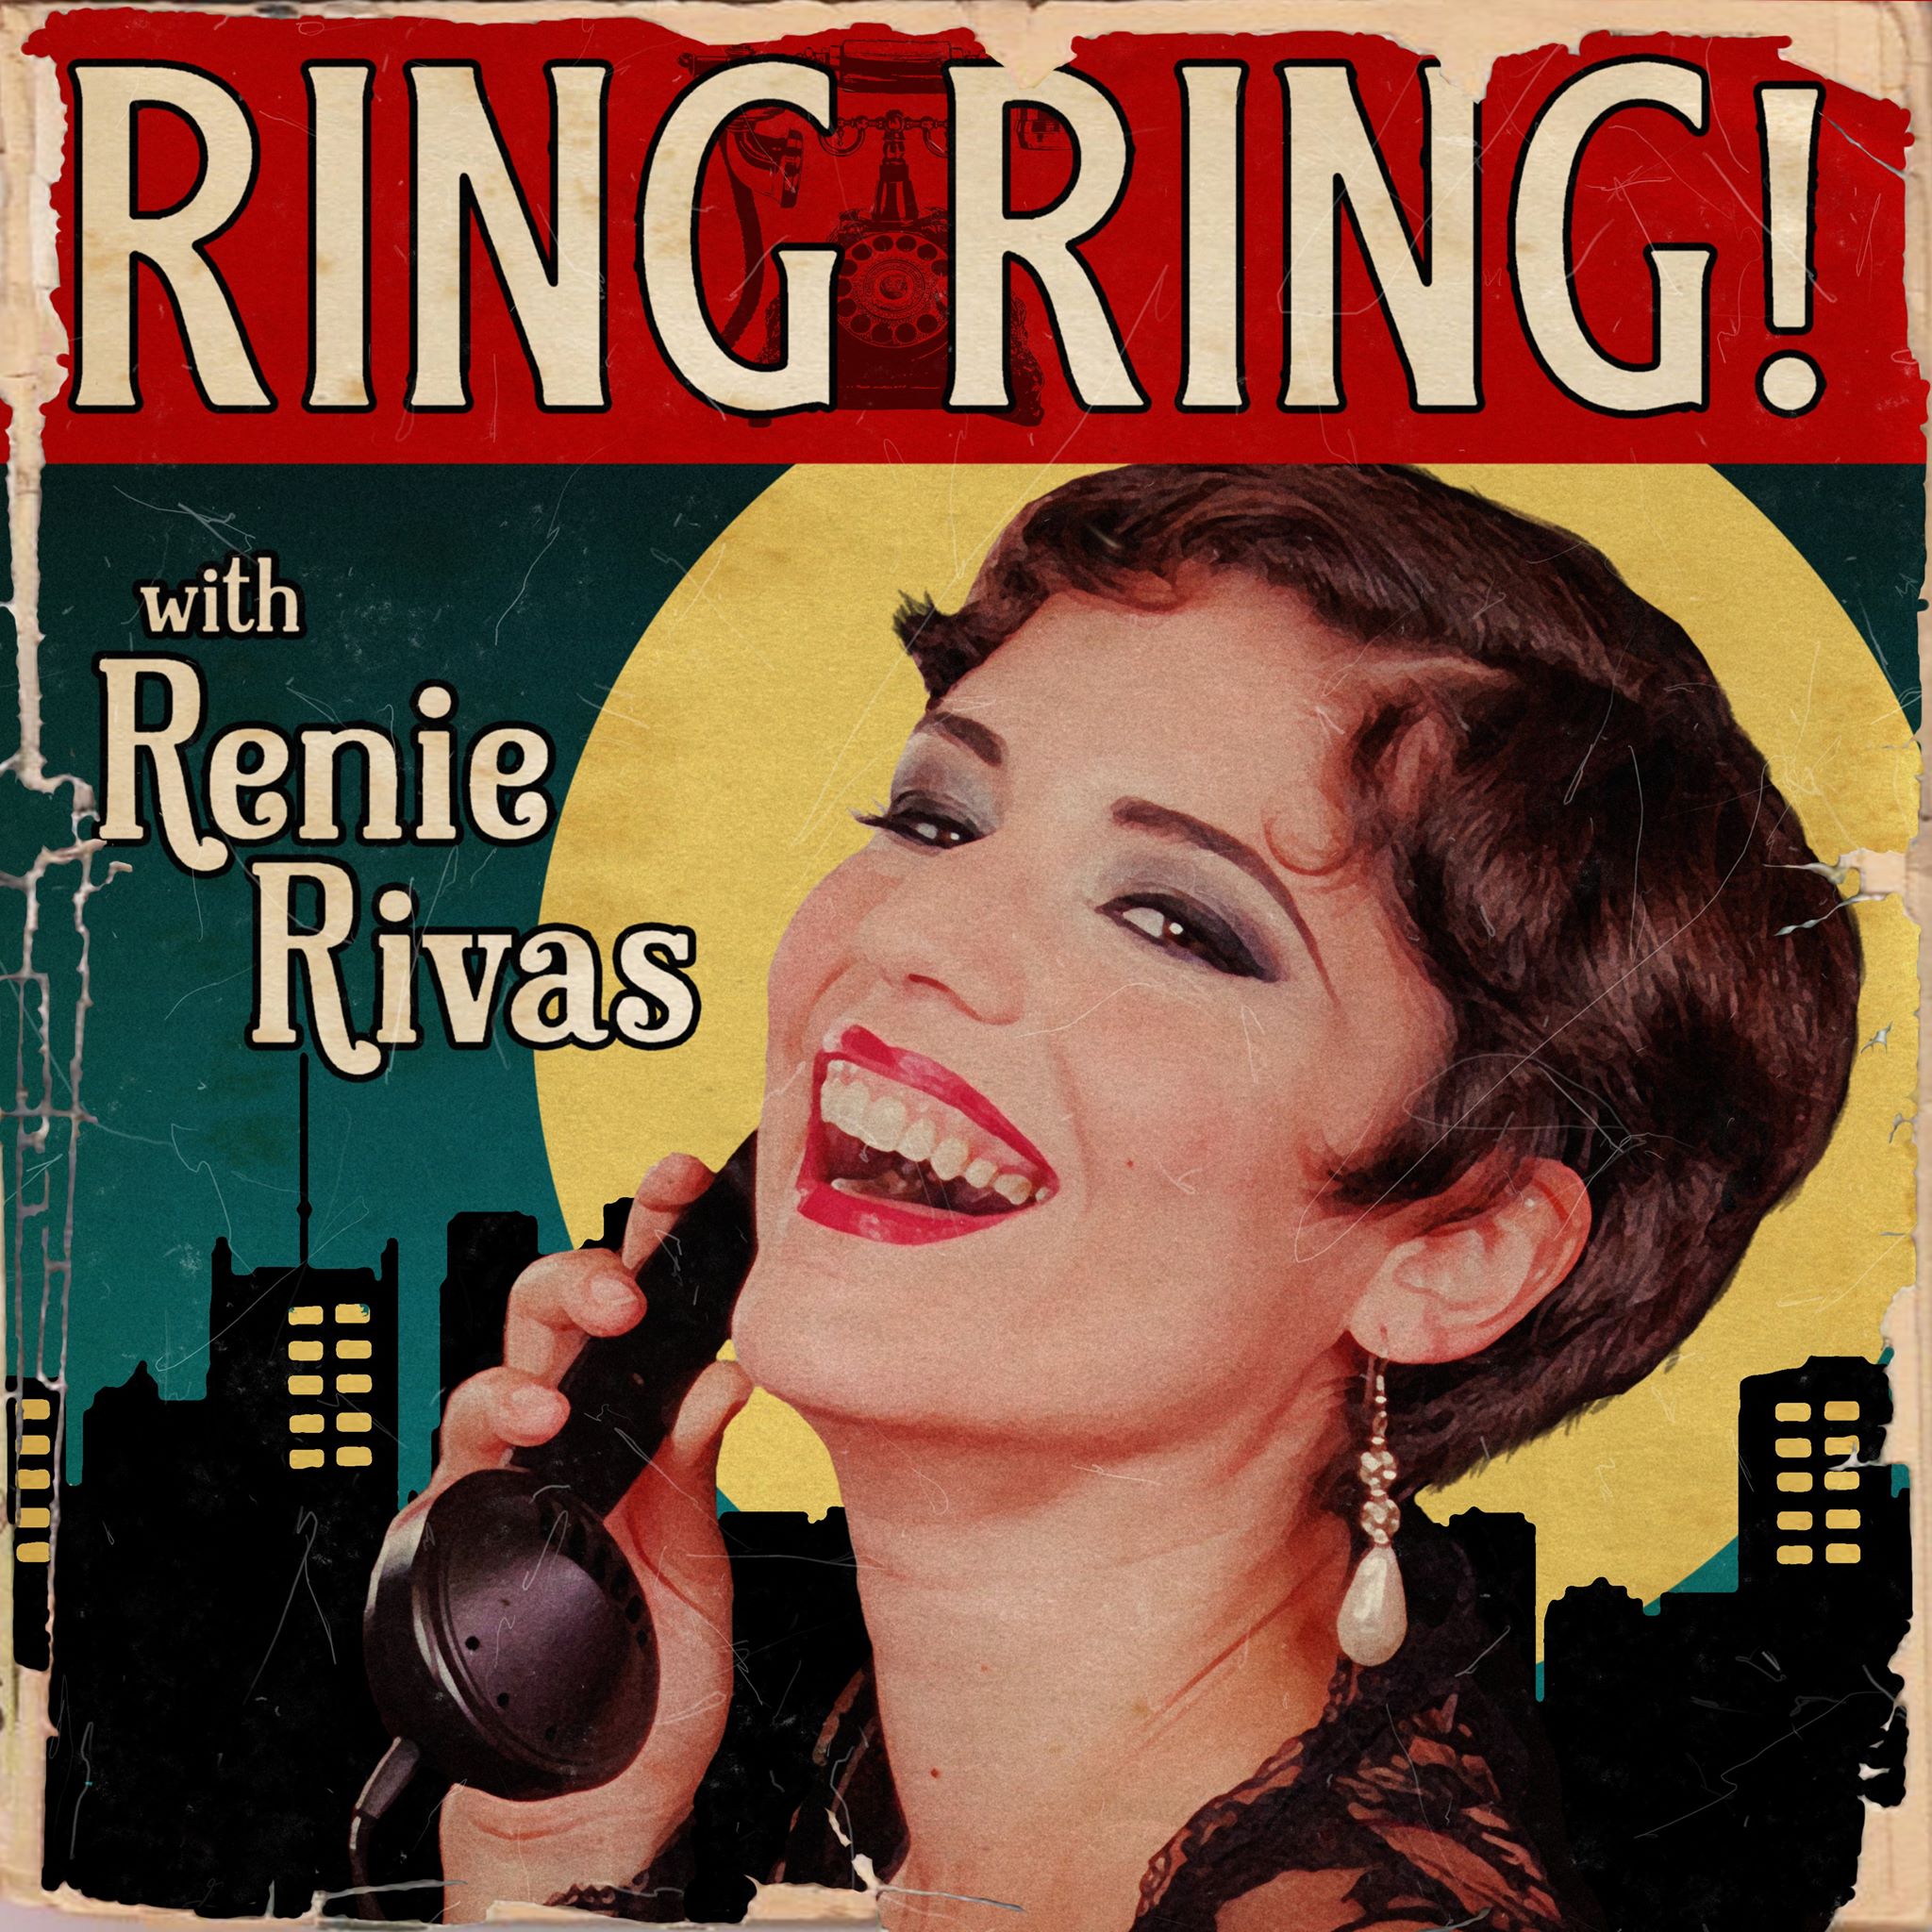 Ring Ring! with Renie Rivas